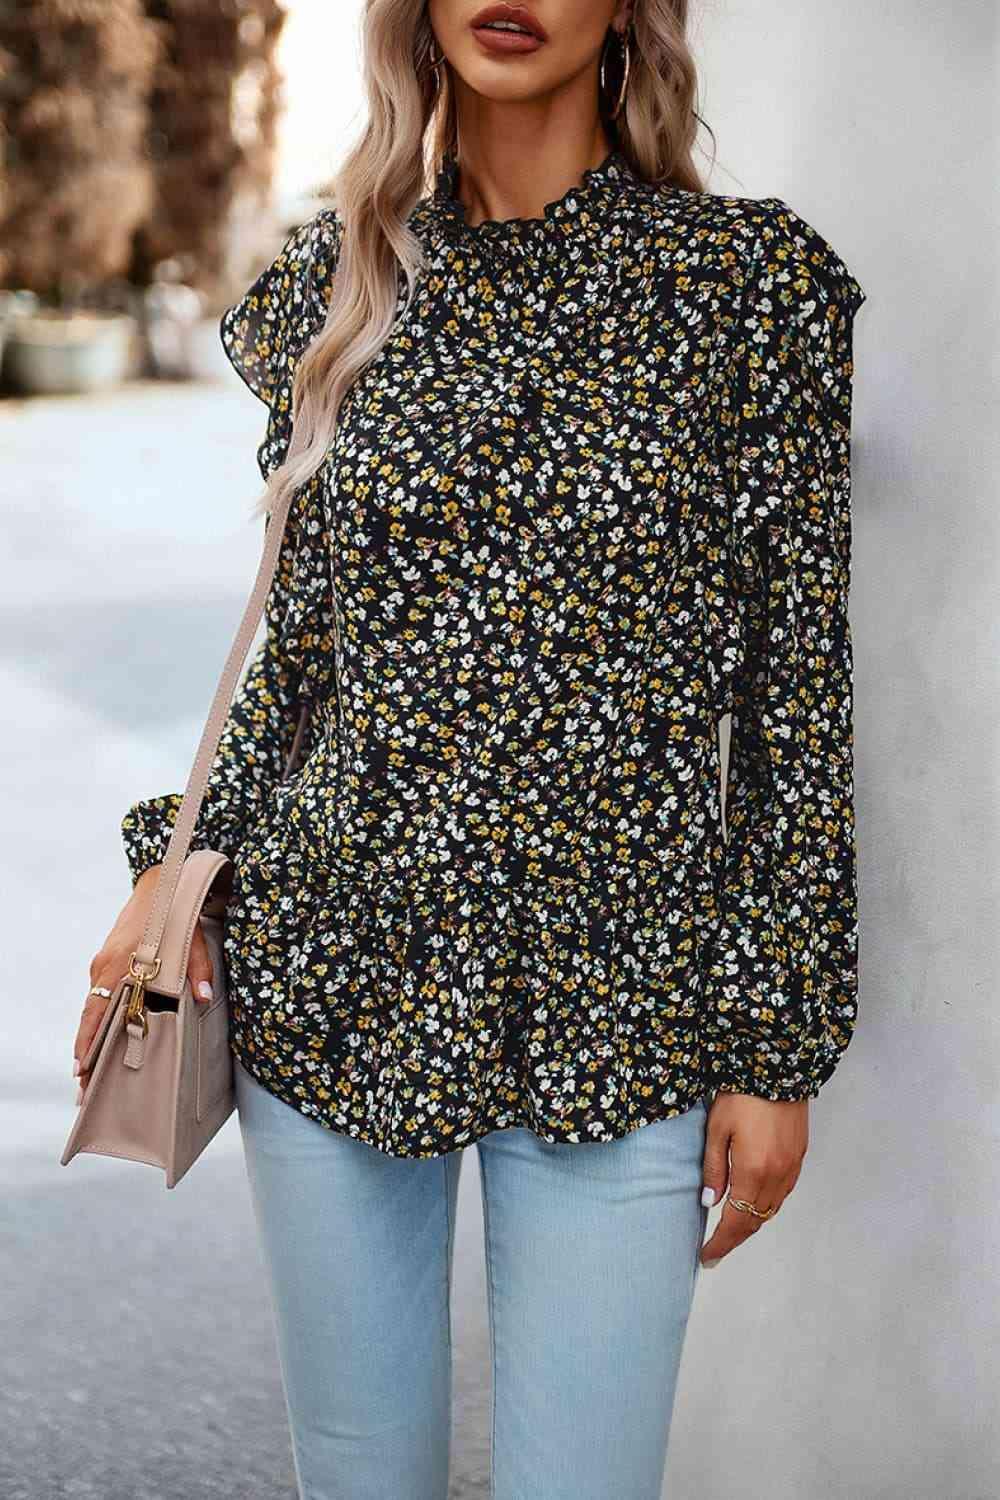 a woman wearing a black and yellow floral blouse